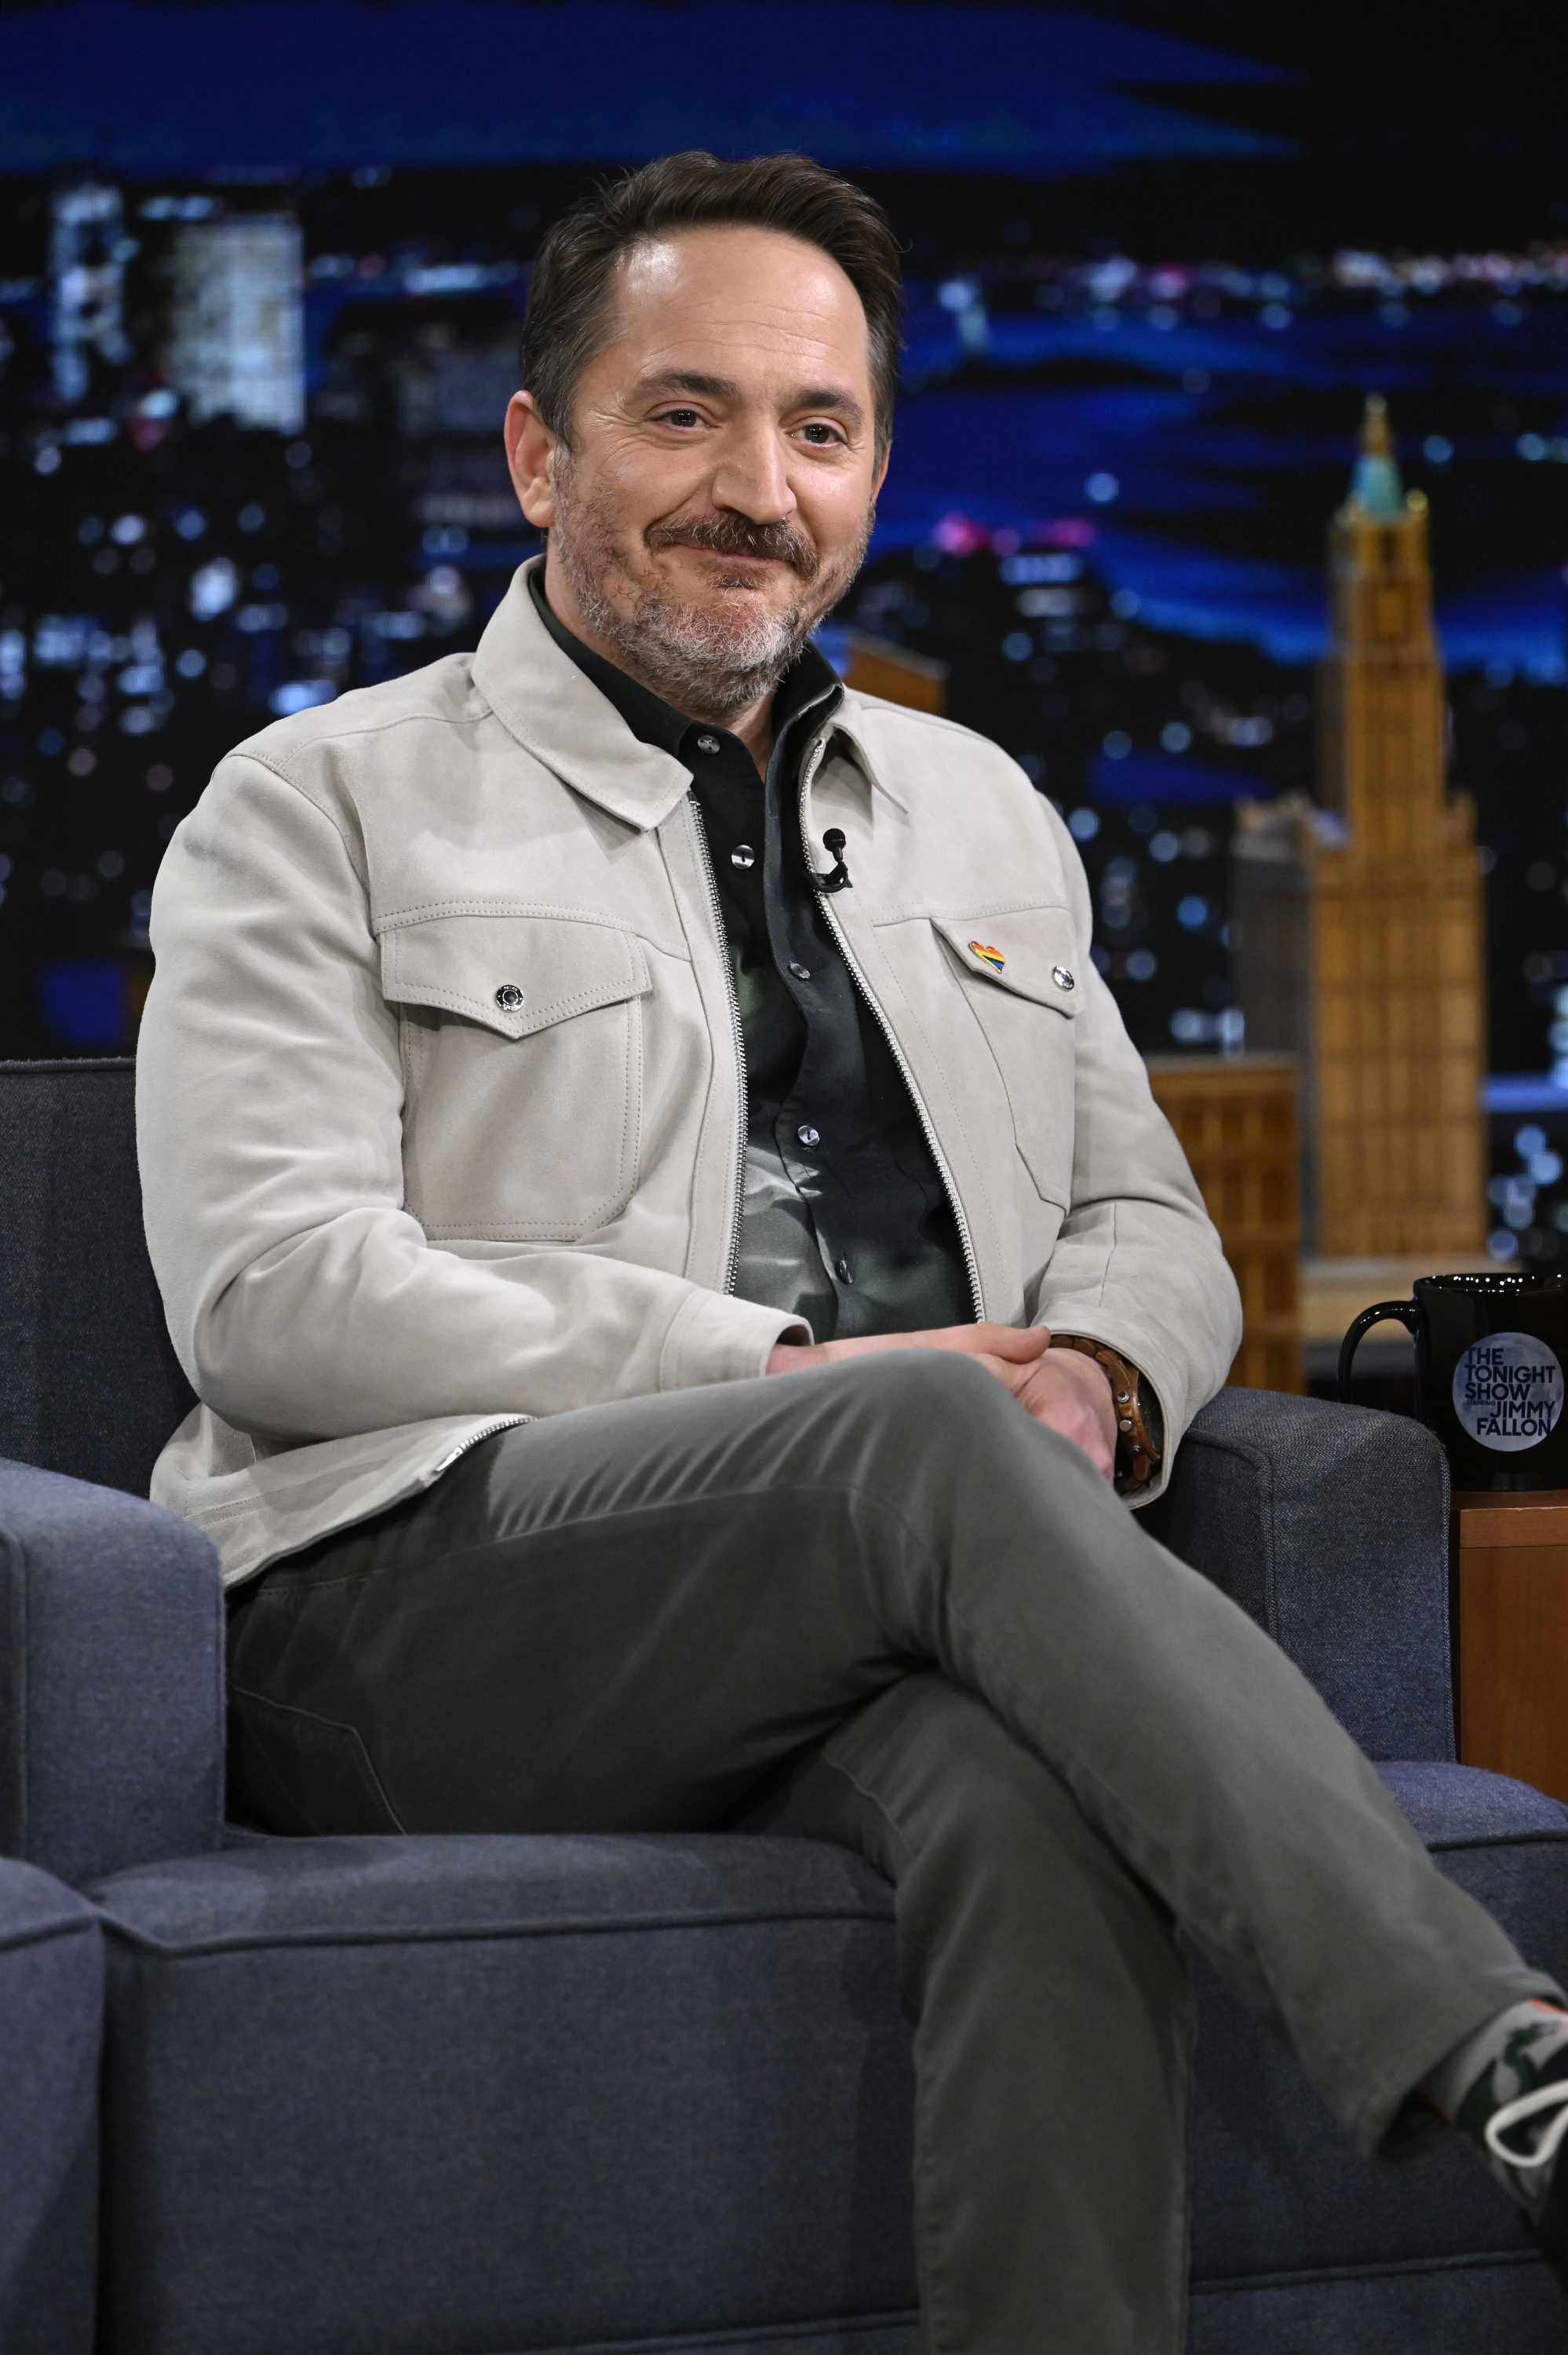 Ben Falcone is pictured during his interview on "The Tonight Show with Jimmy Fallon" on June 6, 2022 | Source: Getty Images